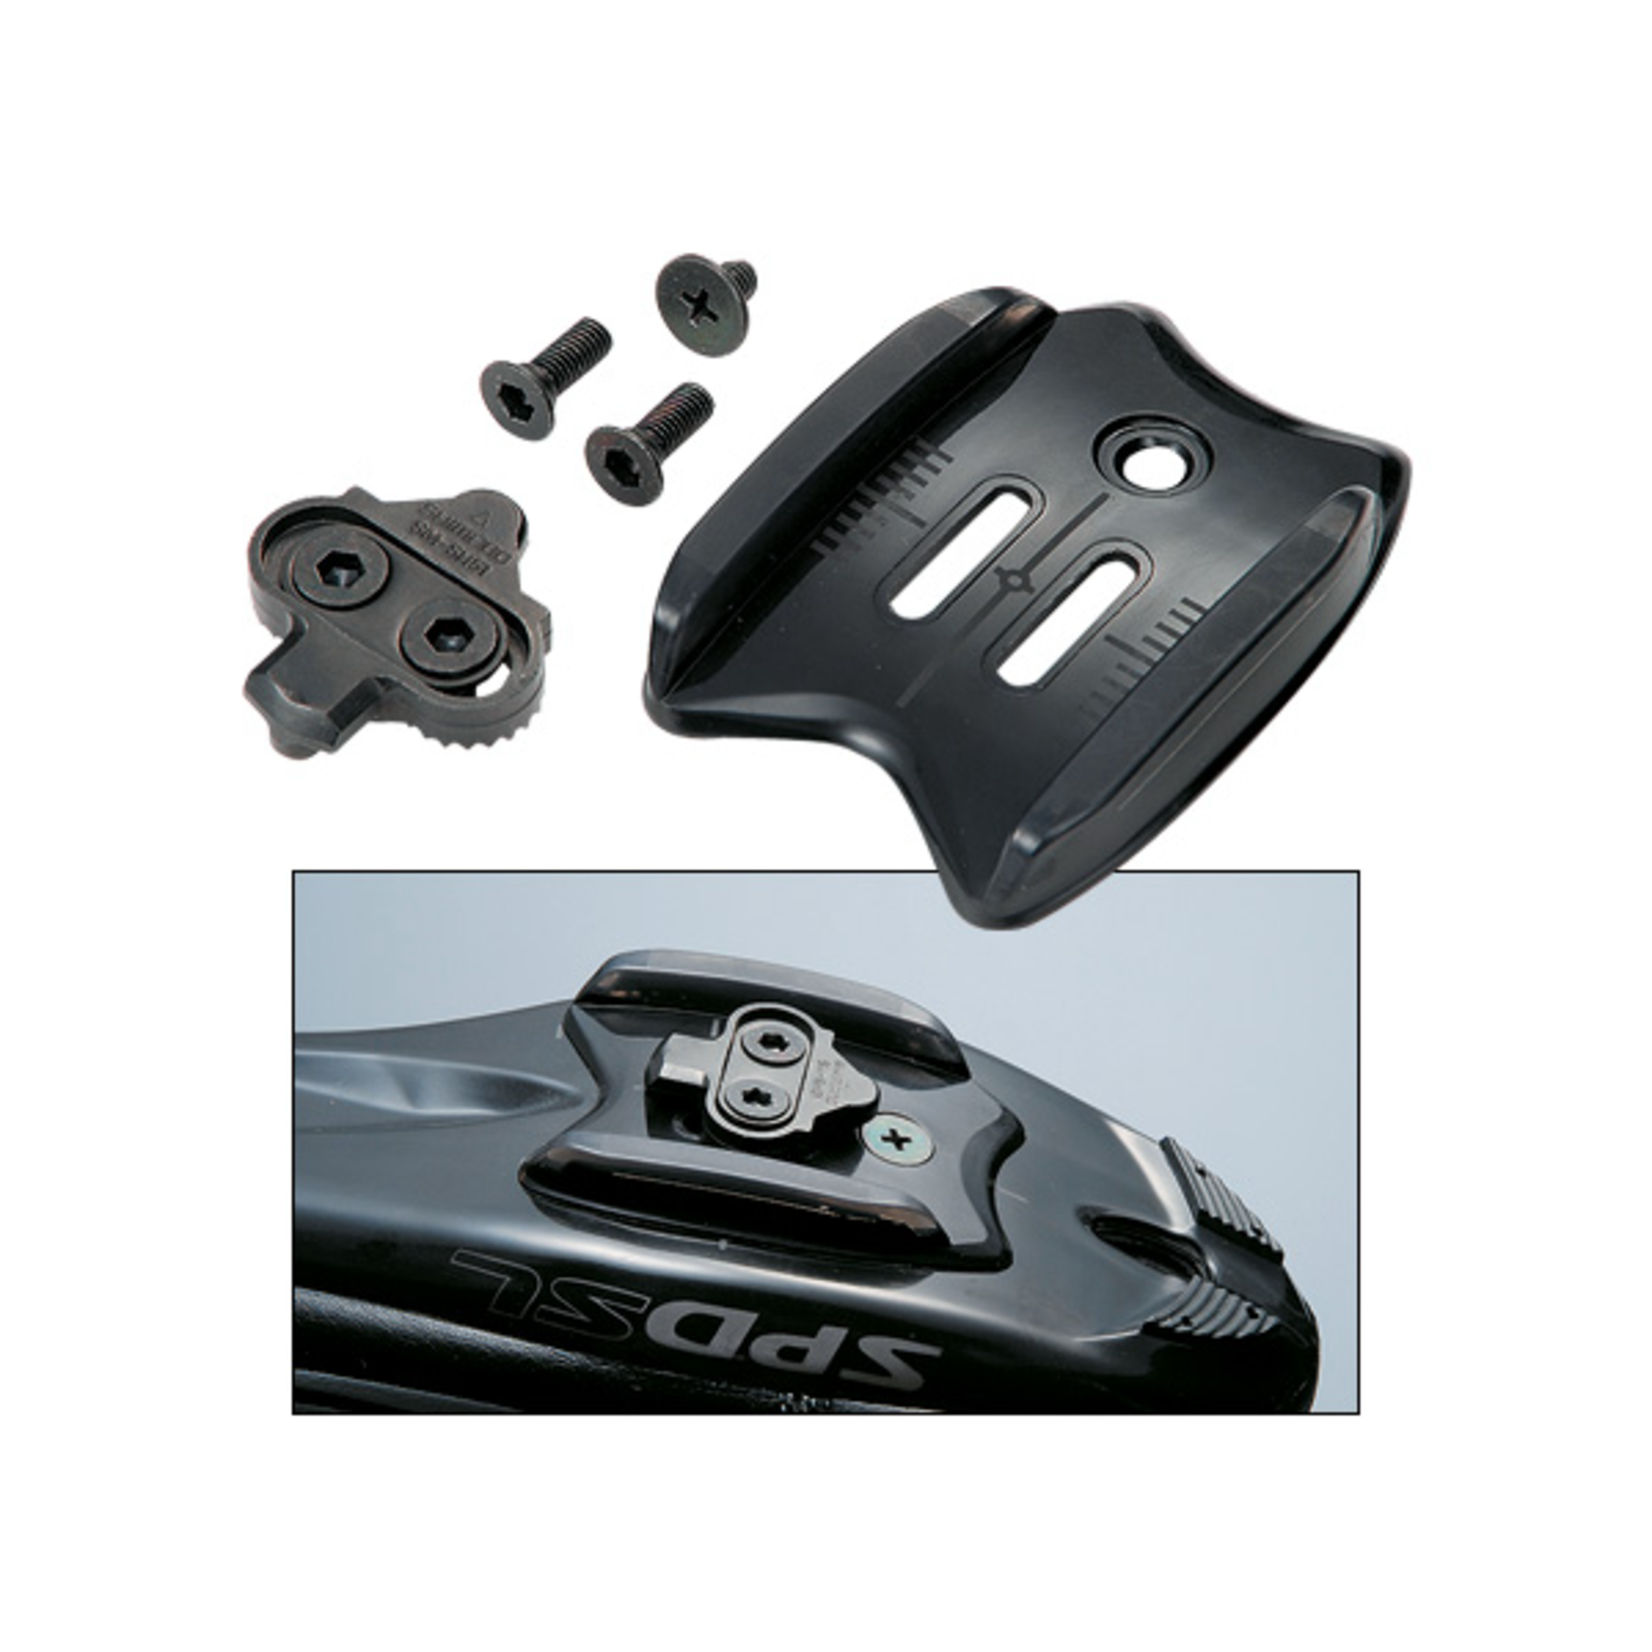 Shimano Shimano SM-SH40 Pontoon Adapters Road Outsole To Speed